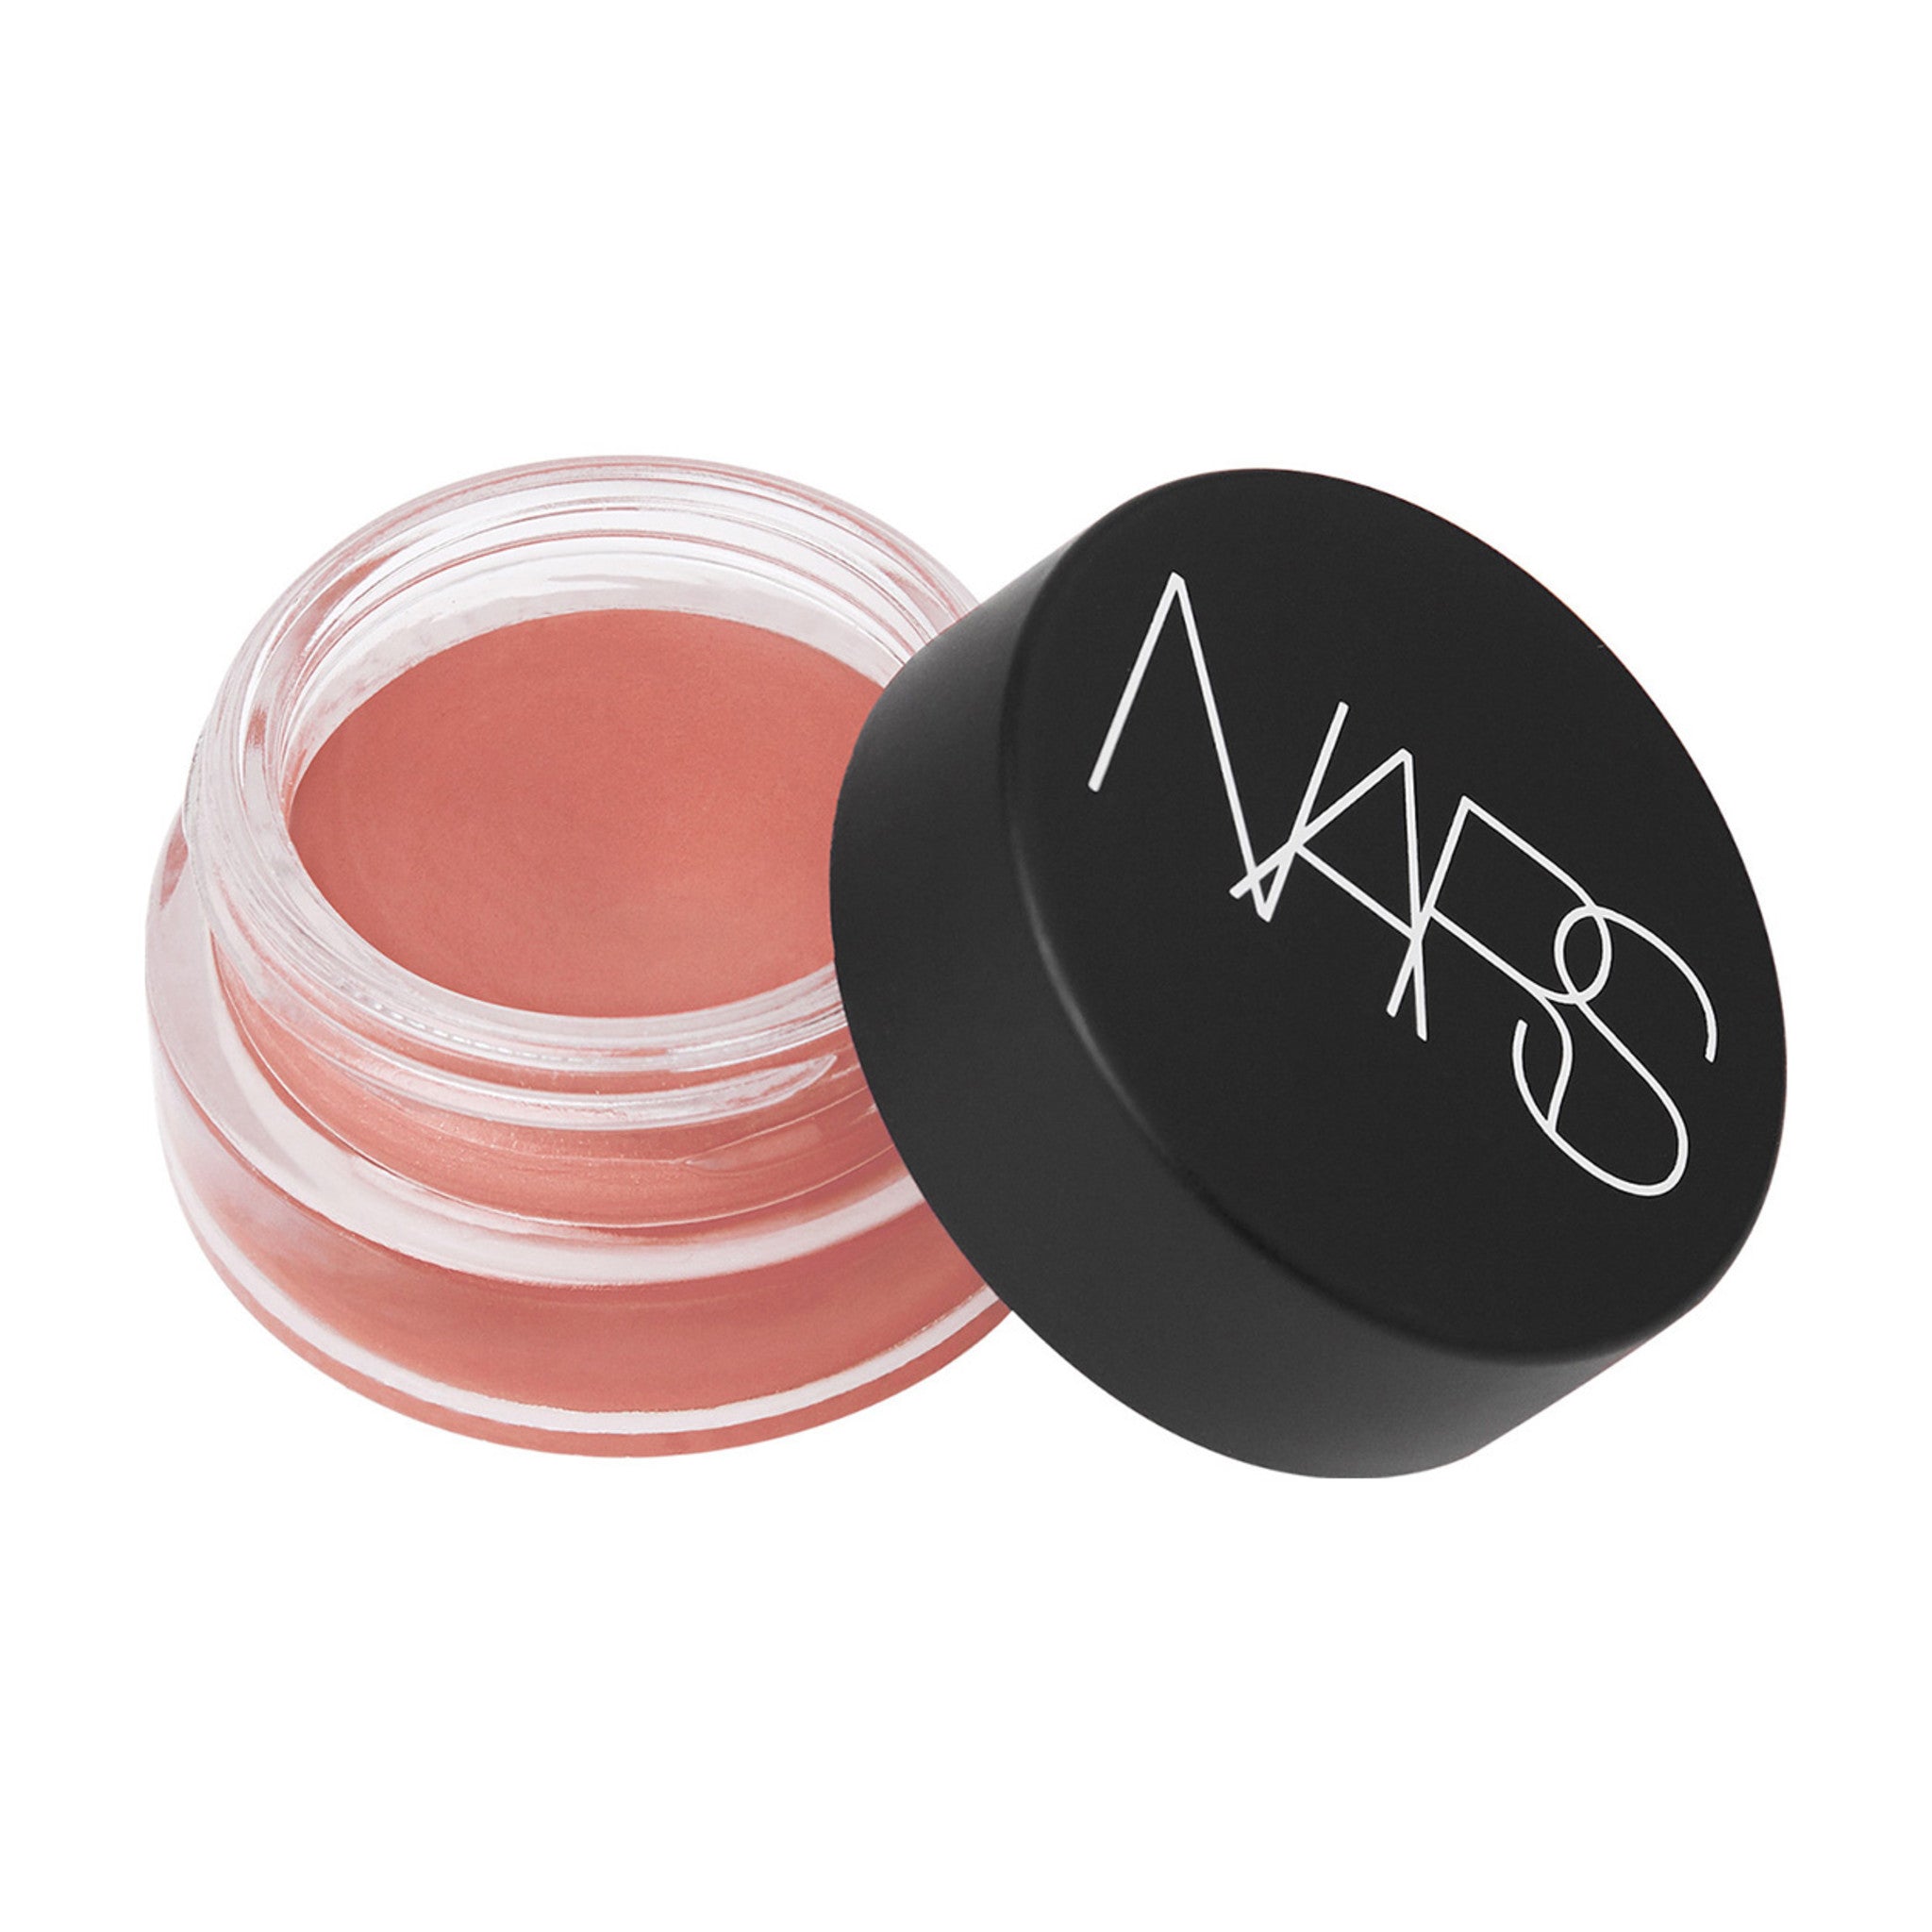 Limited edition Nars Air Matte Blush Color/Shade variant: Freedom main image. This product is in the color nude